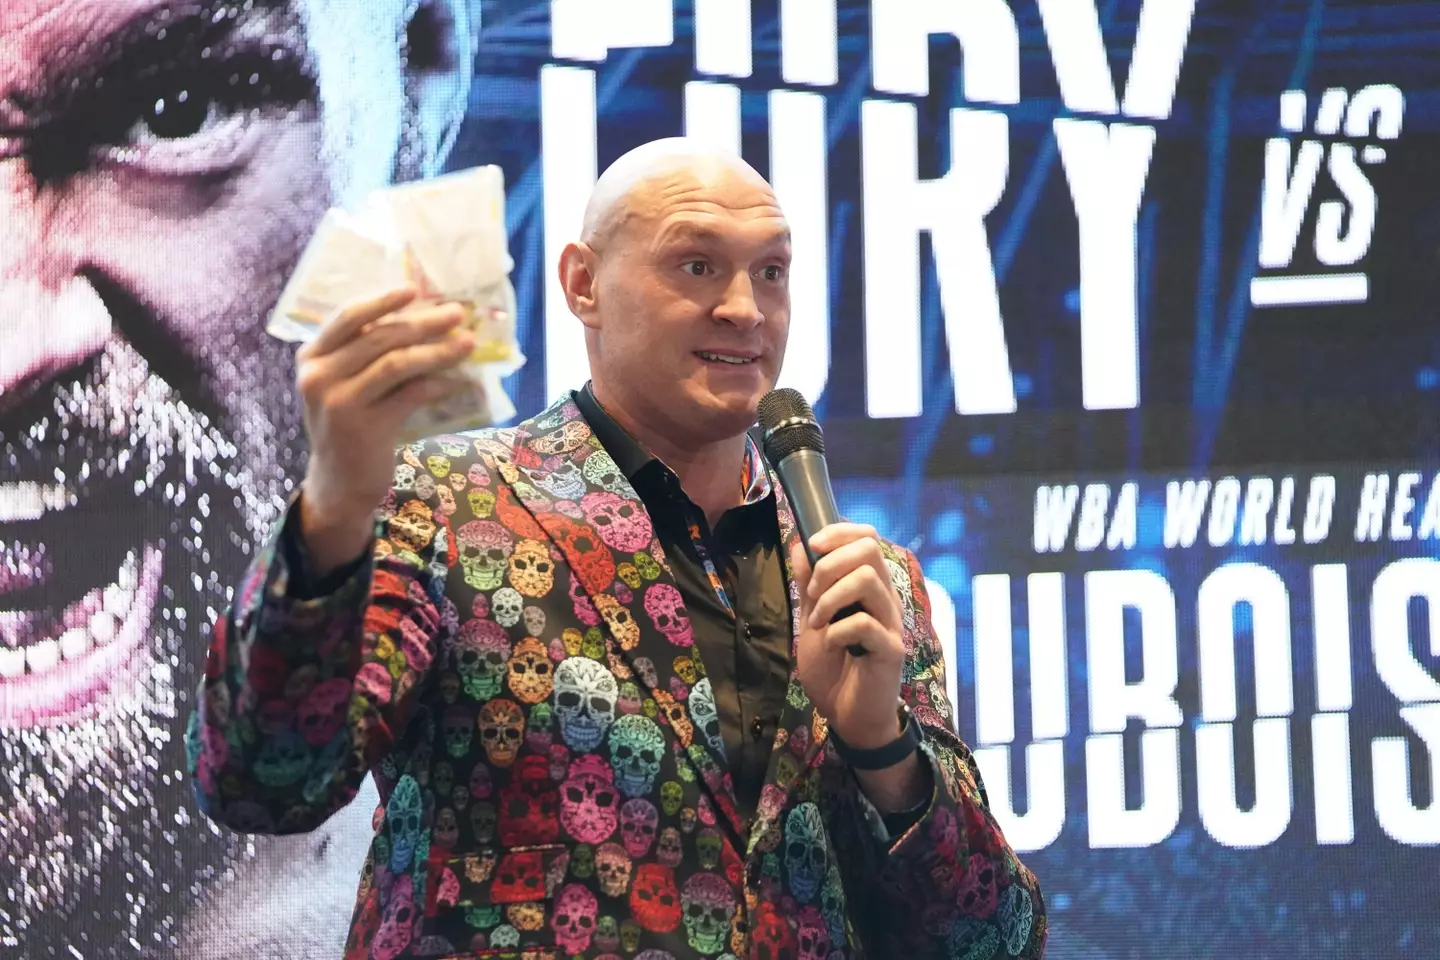 Fury during a press conference earlier this year. (Image